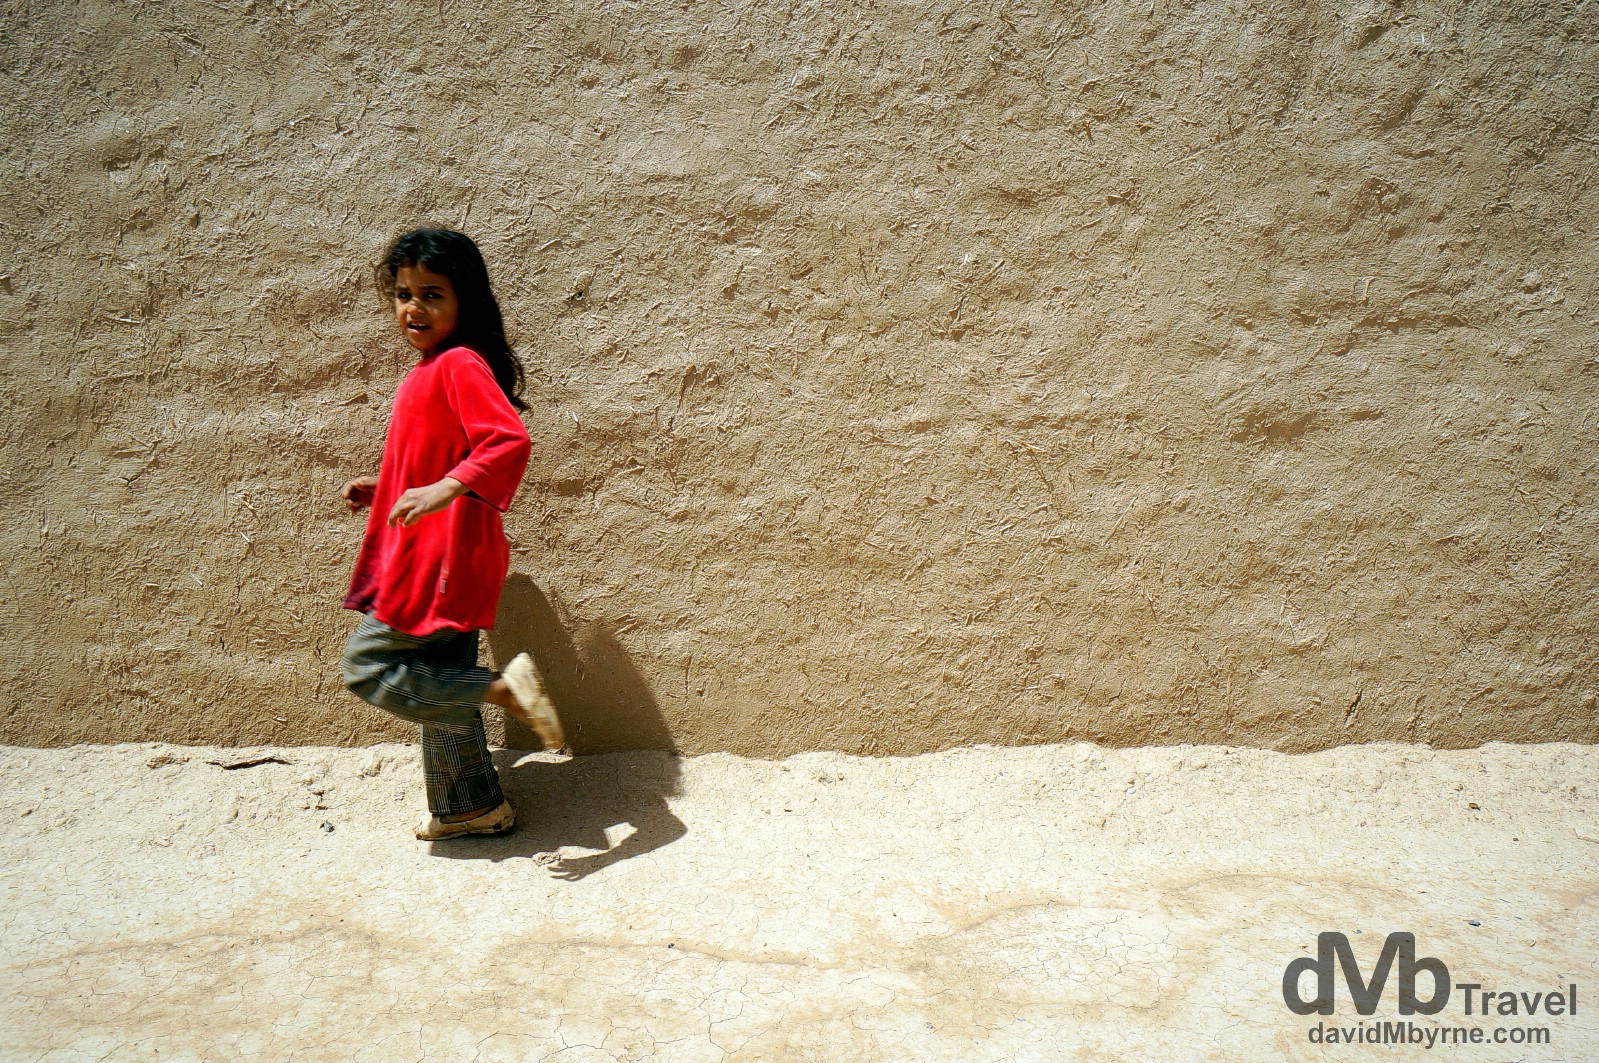 Walking by the pise (mud & rubble building material) walls of Ksar Oualad Abdelhalim, Rissani, Morocco. May 22nd, 2014.